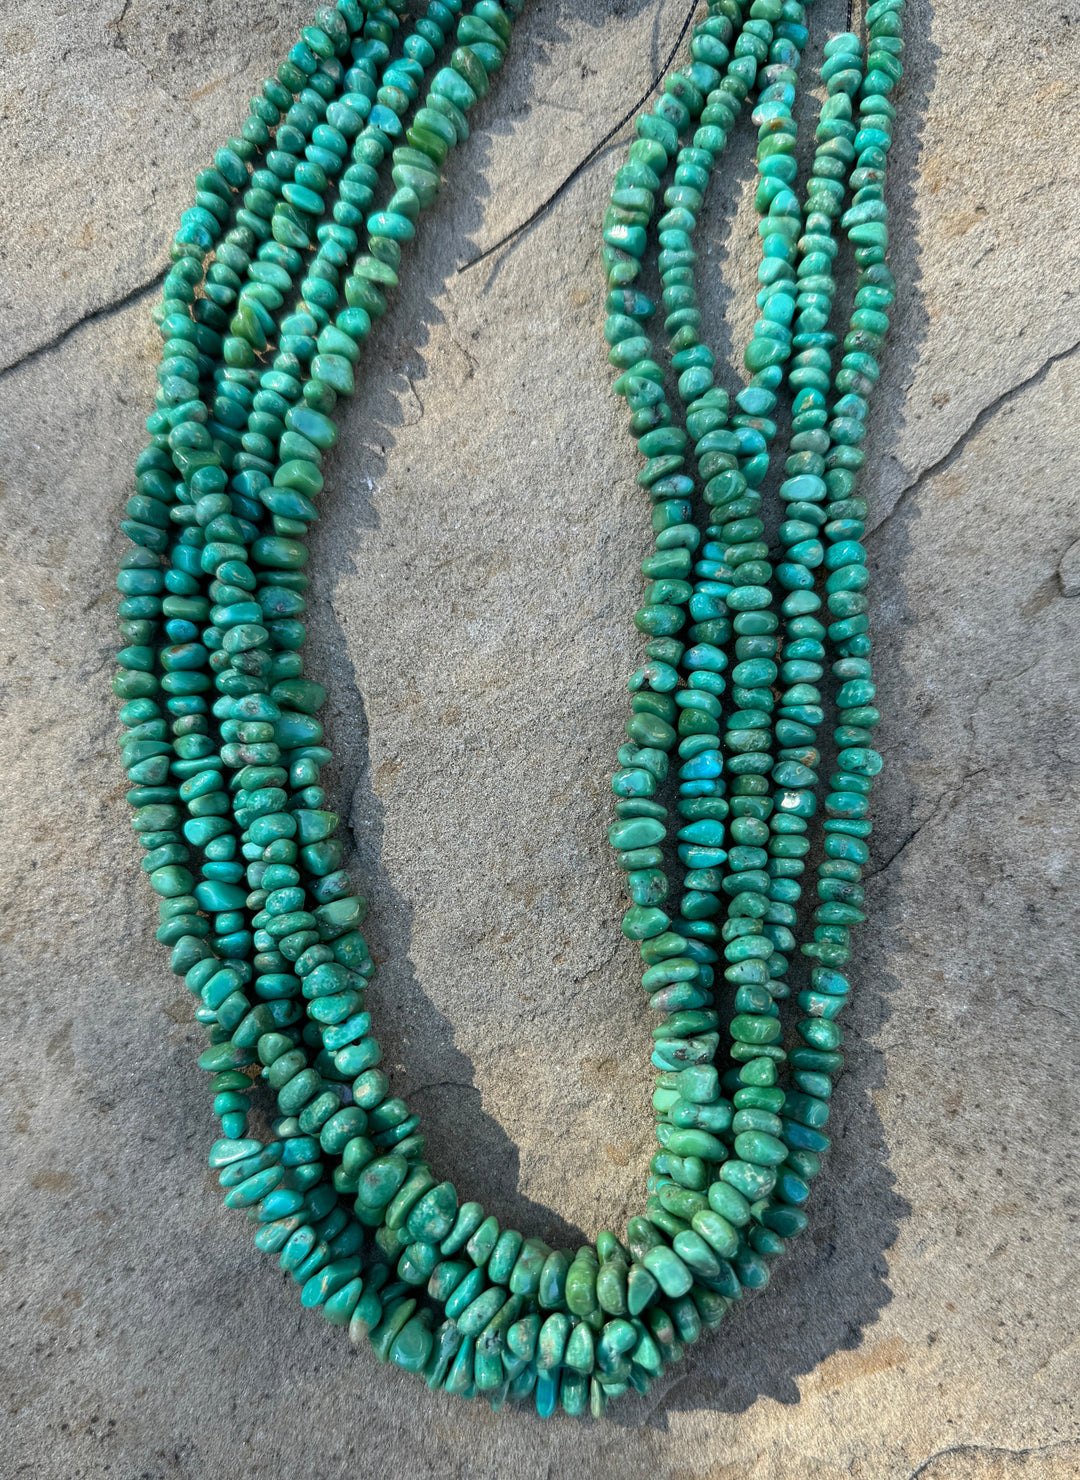 Green Campitos (Mex) Turquoise 5-6mm Chip/Nugget Beads 18